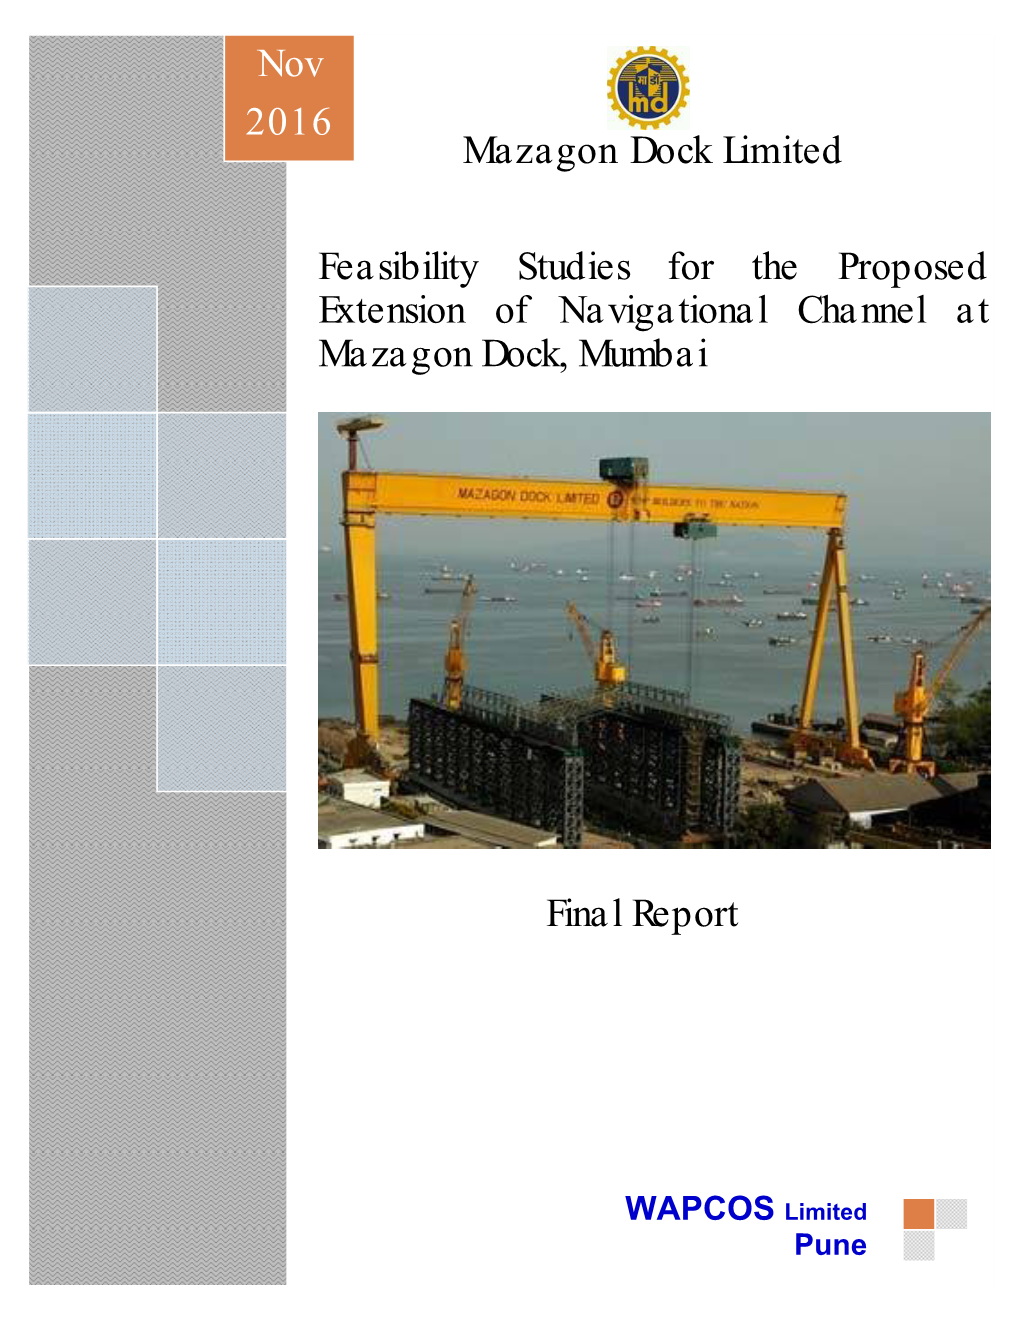 Feasibility Studies for the Proposed Extension of Navigational Channel at Mazagon Dock, Mumbai C